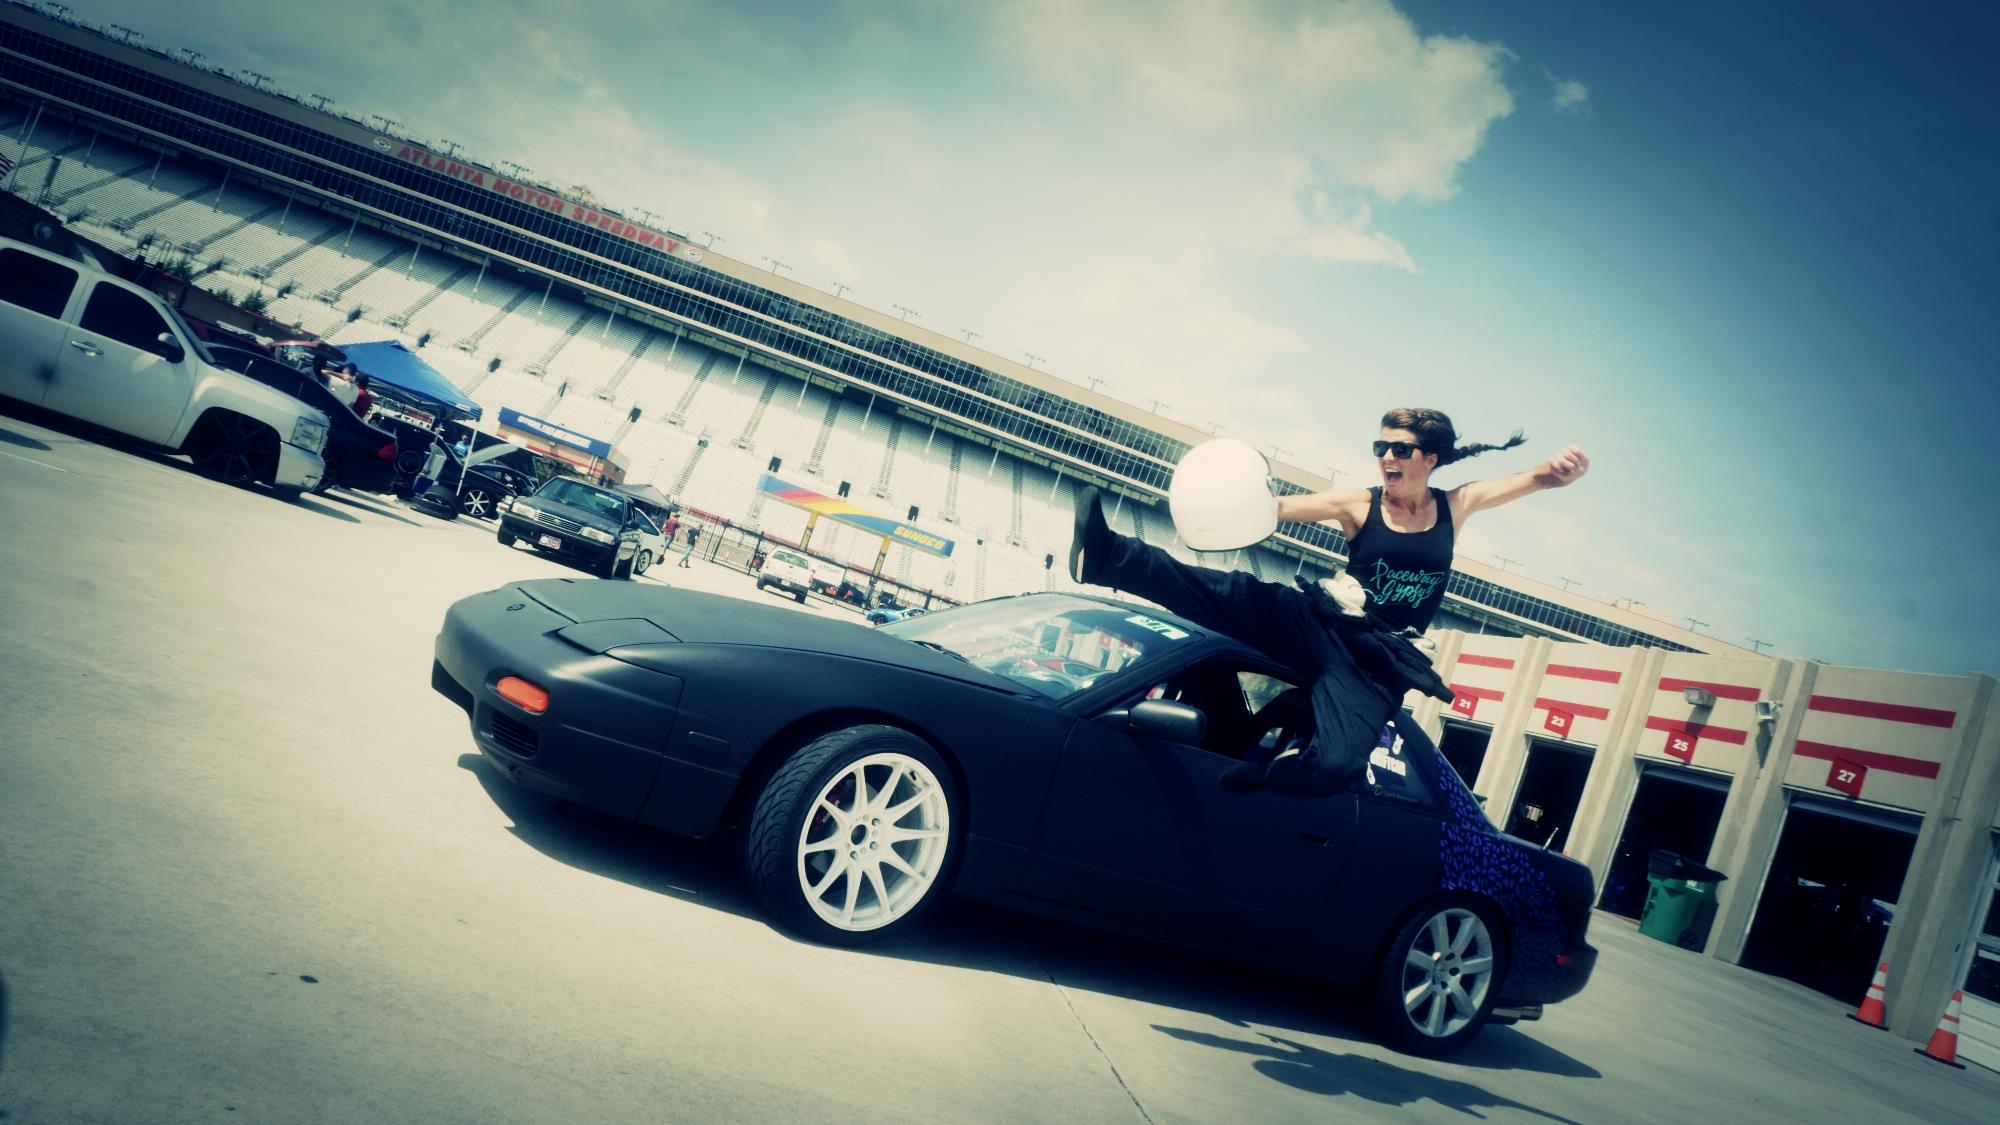 Crystal at Atlanta motor speedway with here s13 Nissan 240sx Drift car. Turning the car into a drift missile project to further enjoy the awesomeness of motor sports!